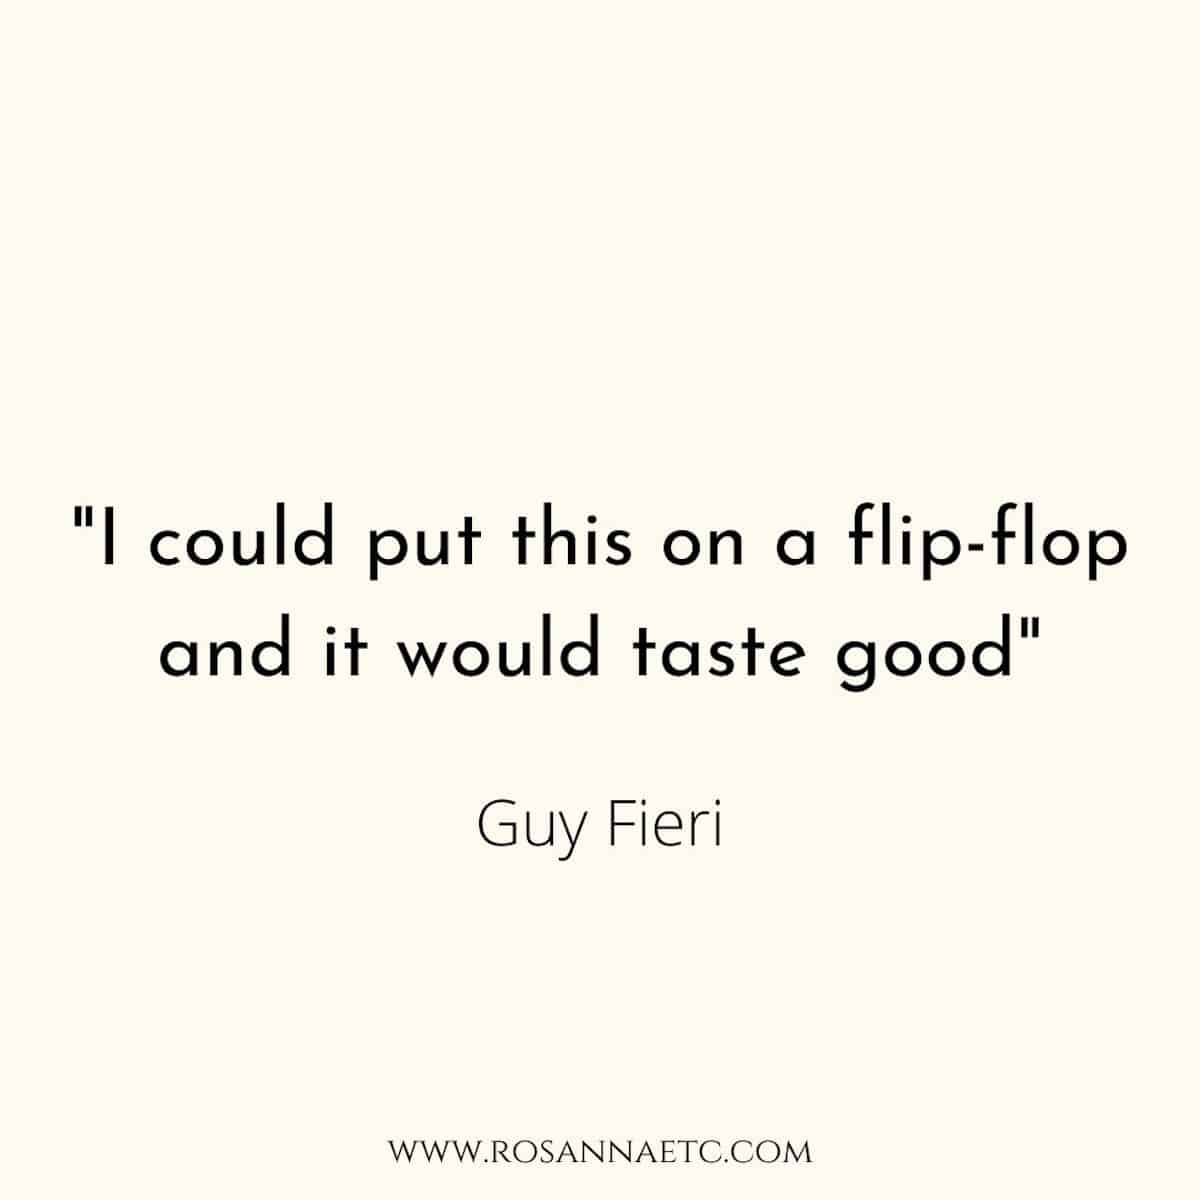 A quote from Guy Fieri that reads "I could put this on a flip-flop and it would taste good".